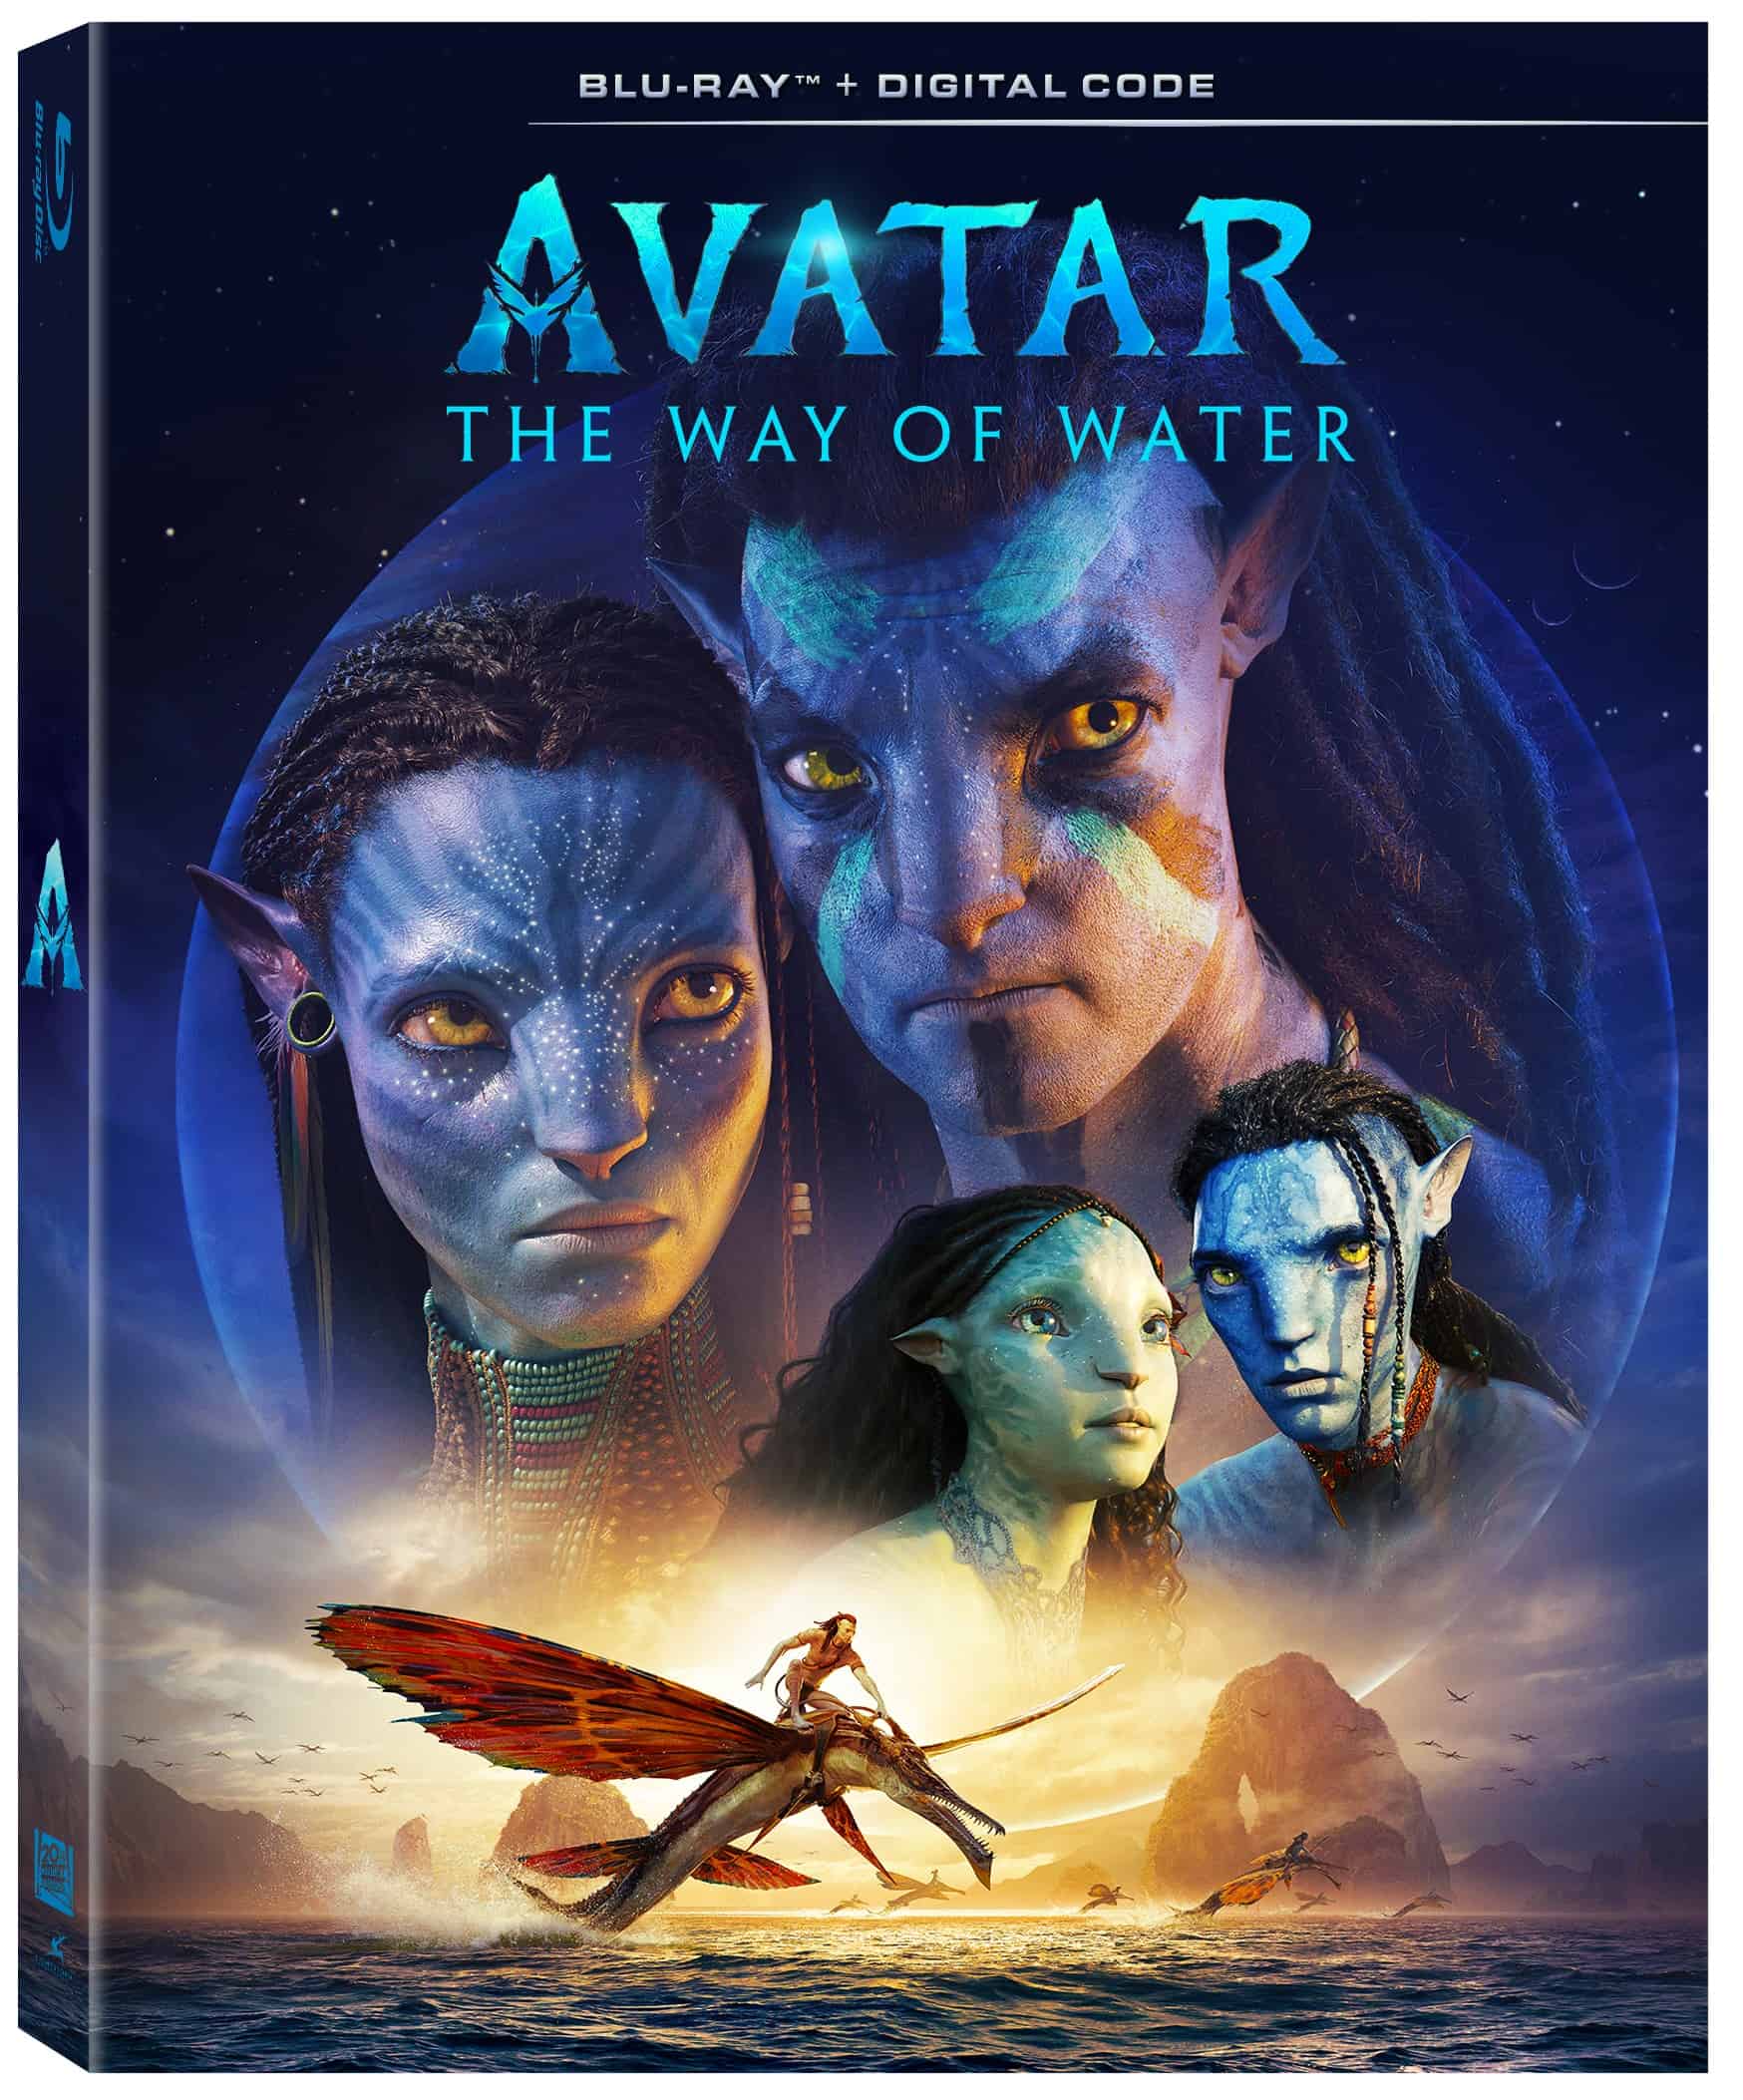 Double Celebration for Avatar Fans: The Arrival of Avatar: The Way of Water and the Ultimate Avatar Experience in 4K UHD 19